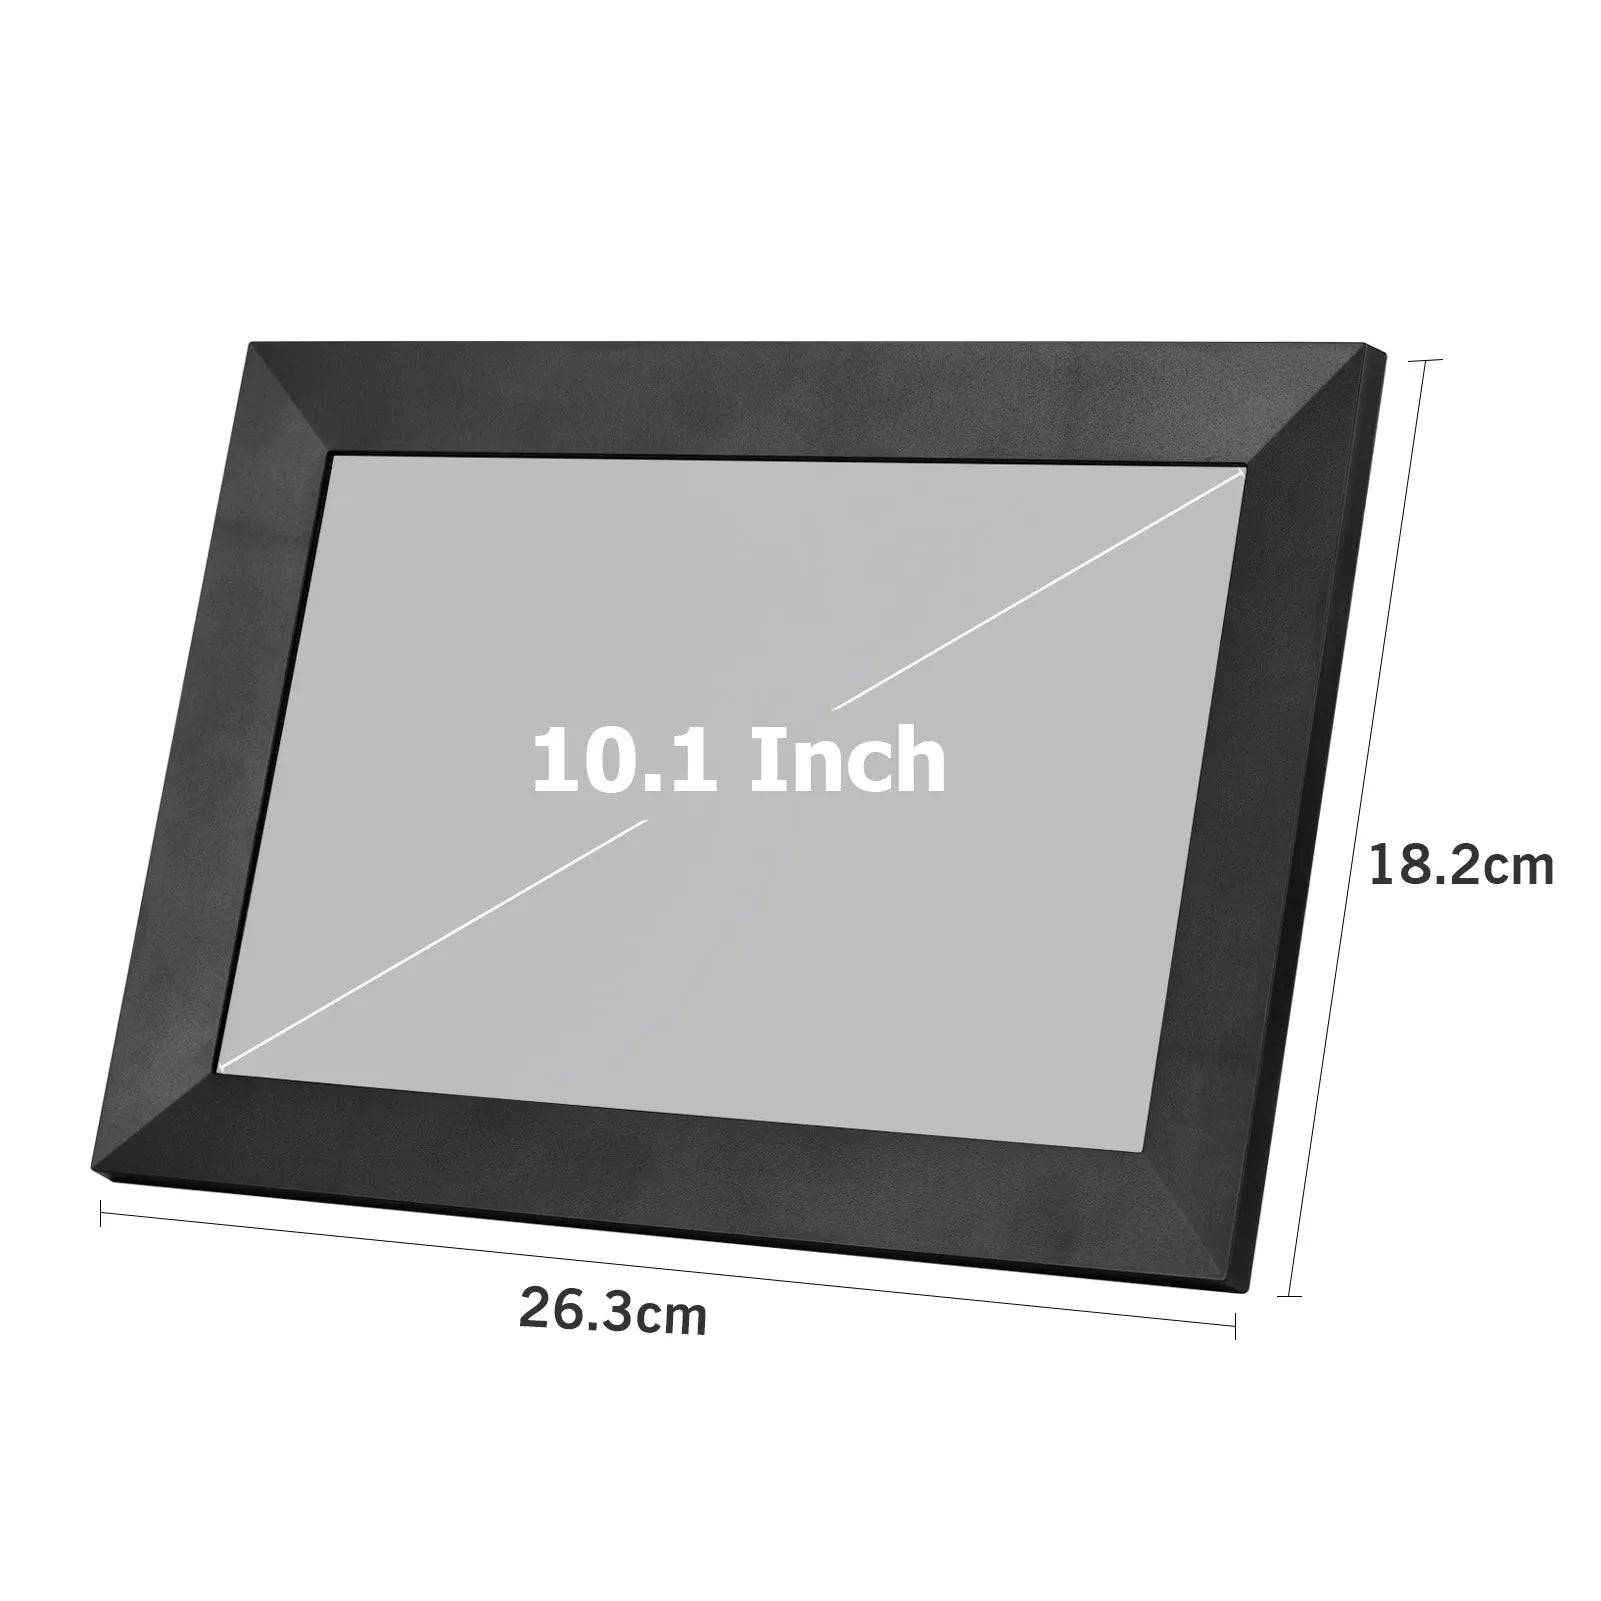 digital photo and video frame, 10.1 inch